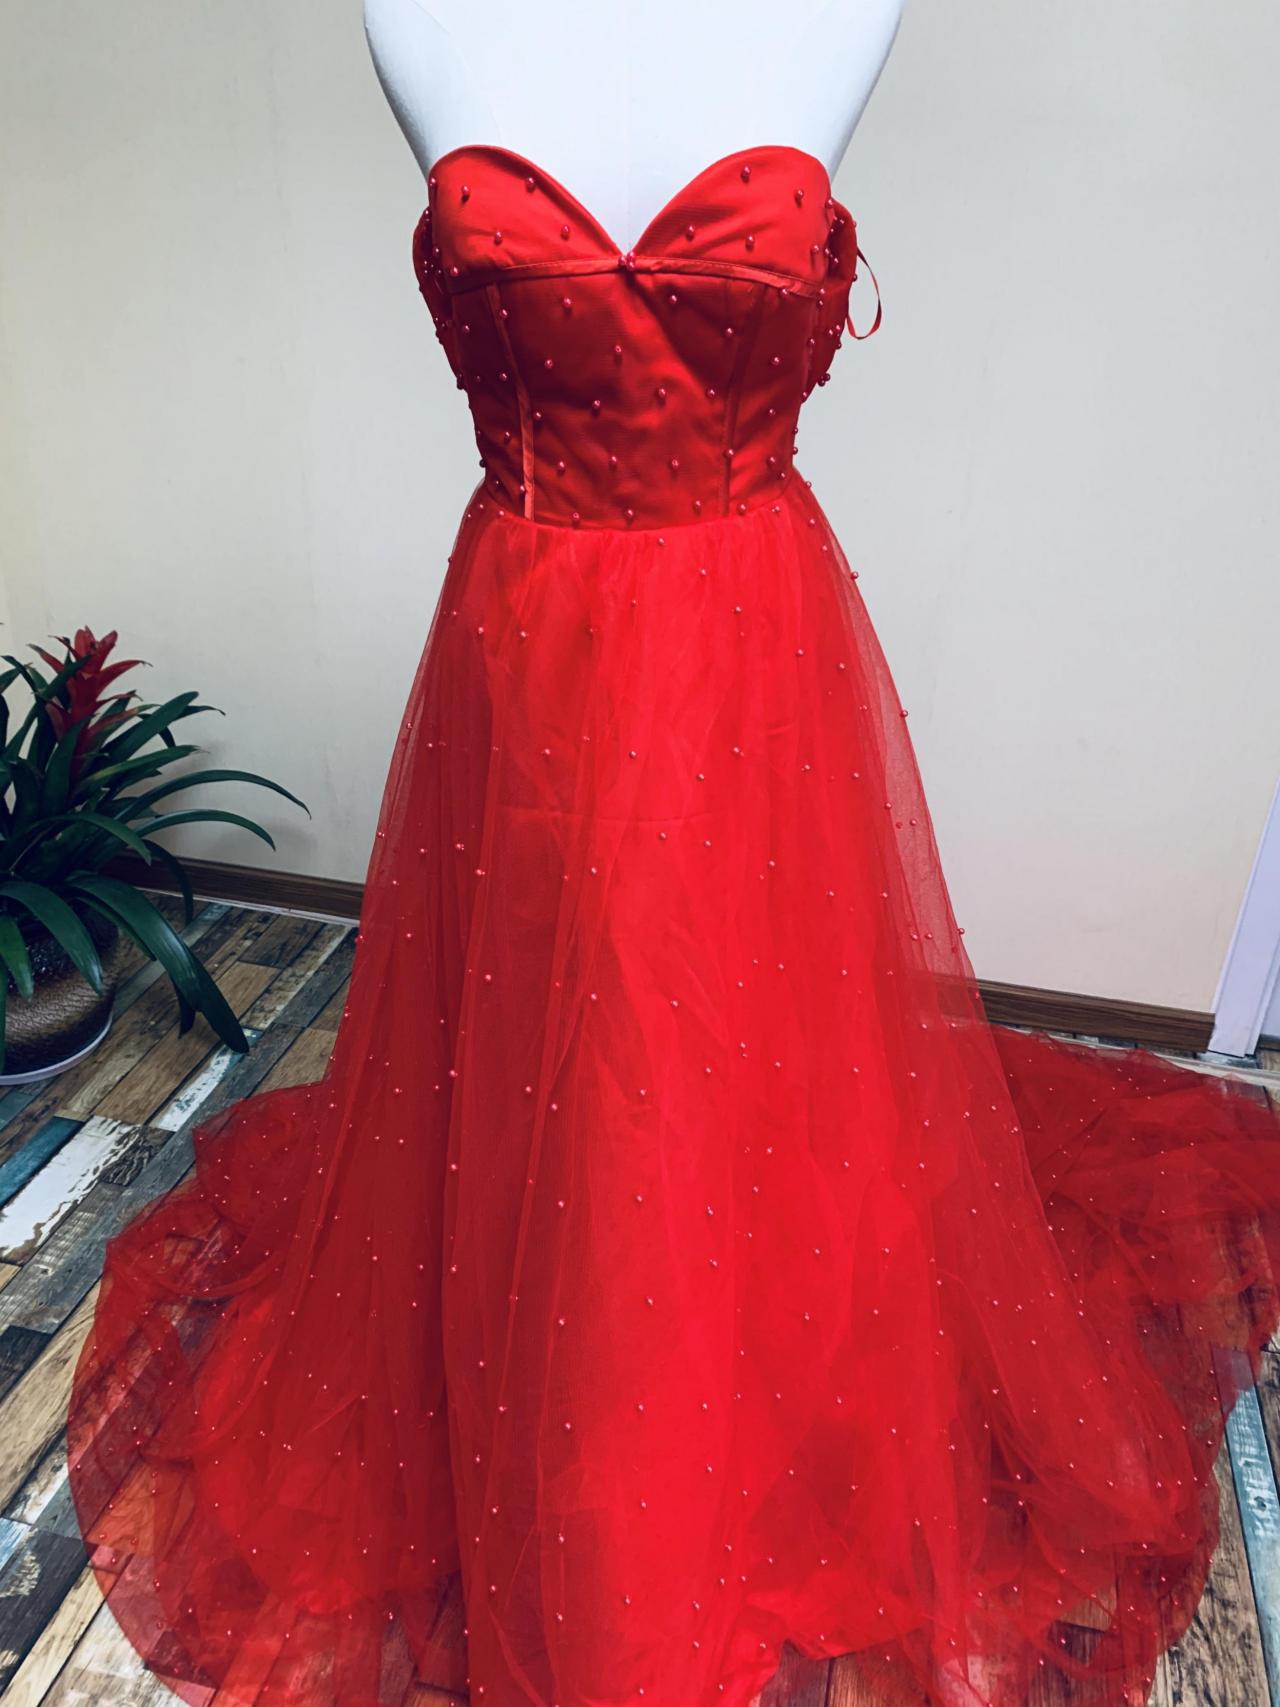 Strapless Prom Dress,red Party Dress,ball Gown Dress With Beads,